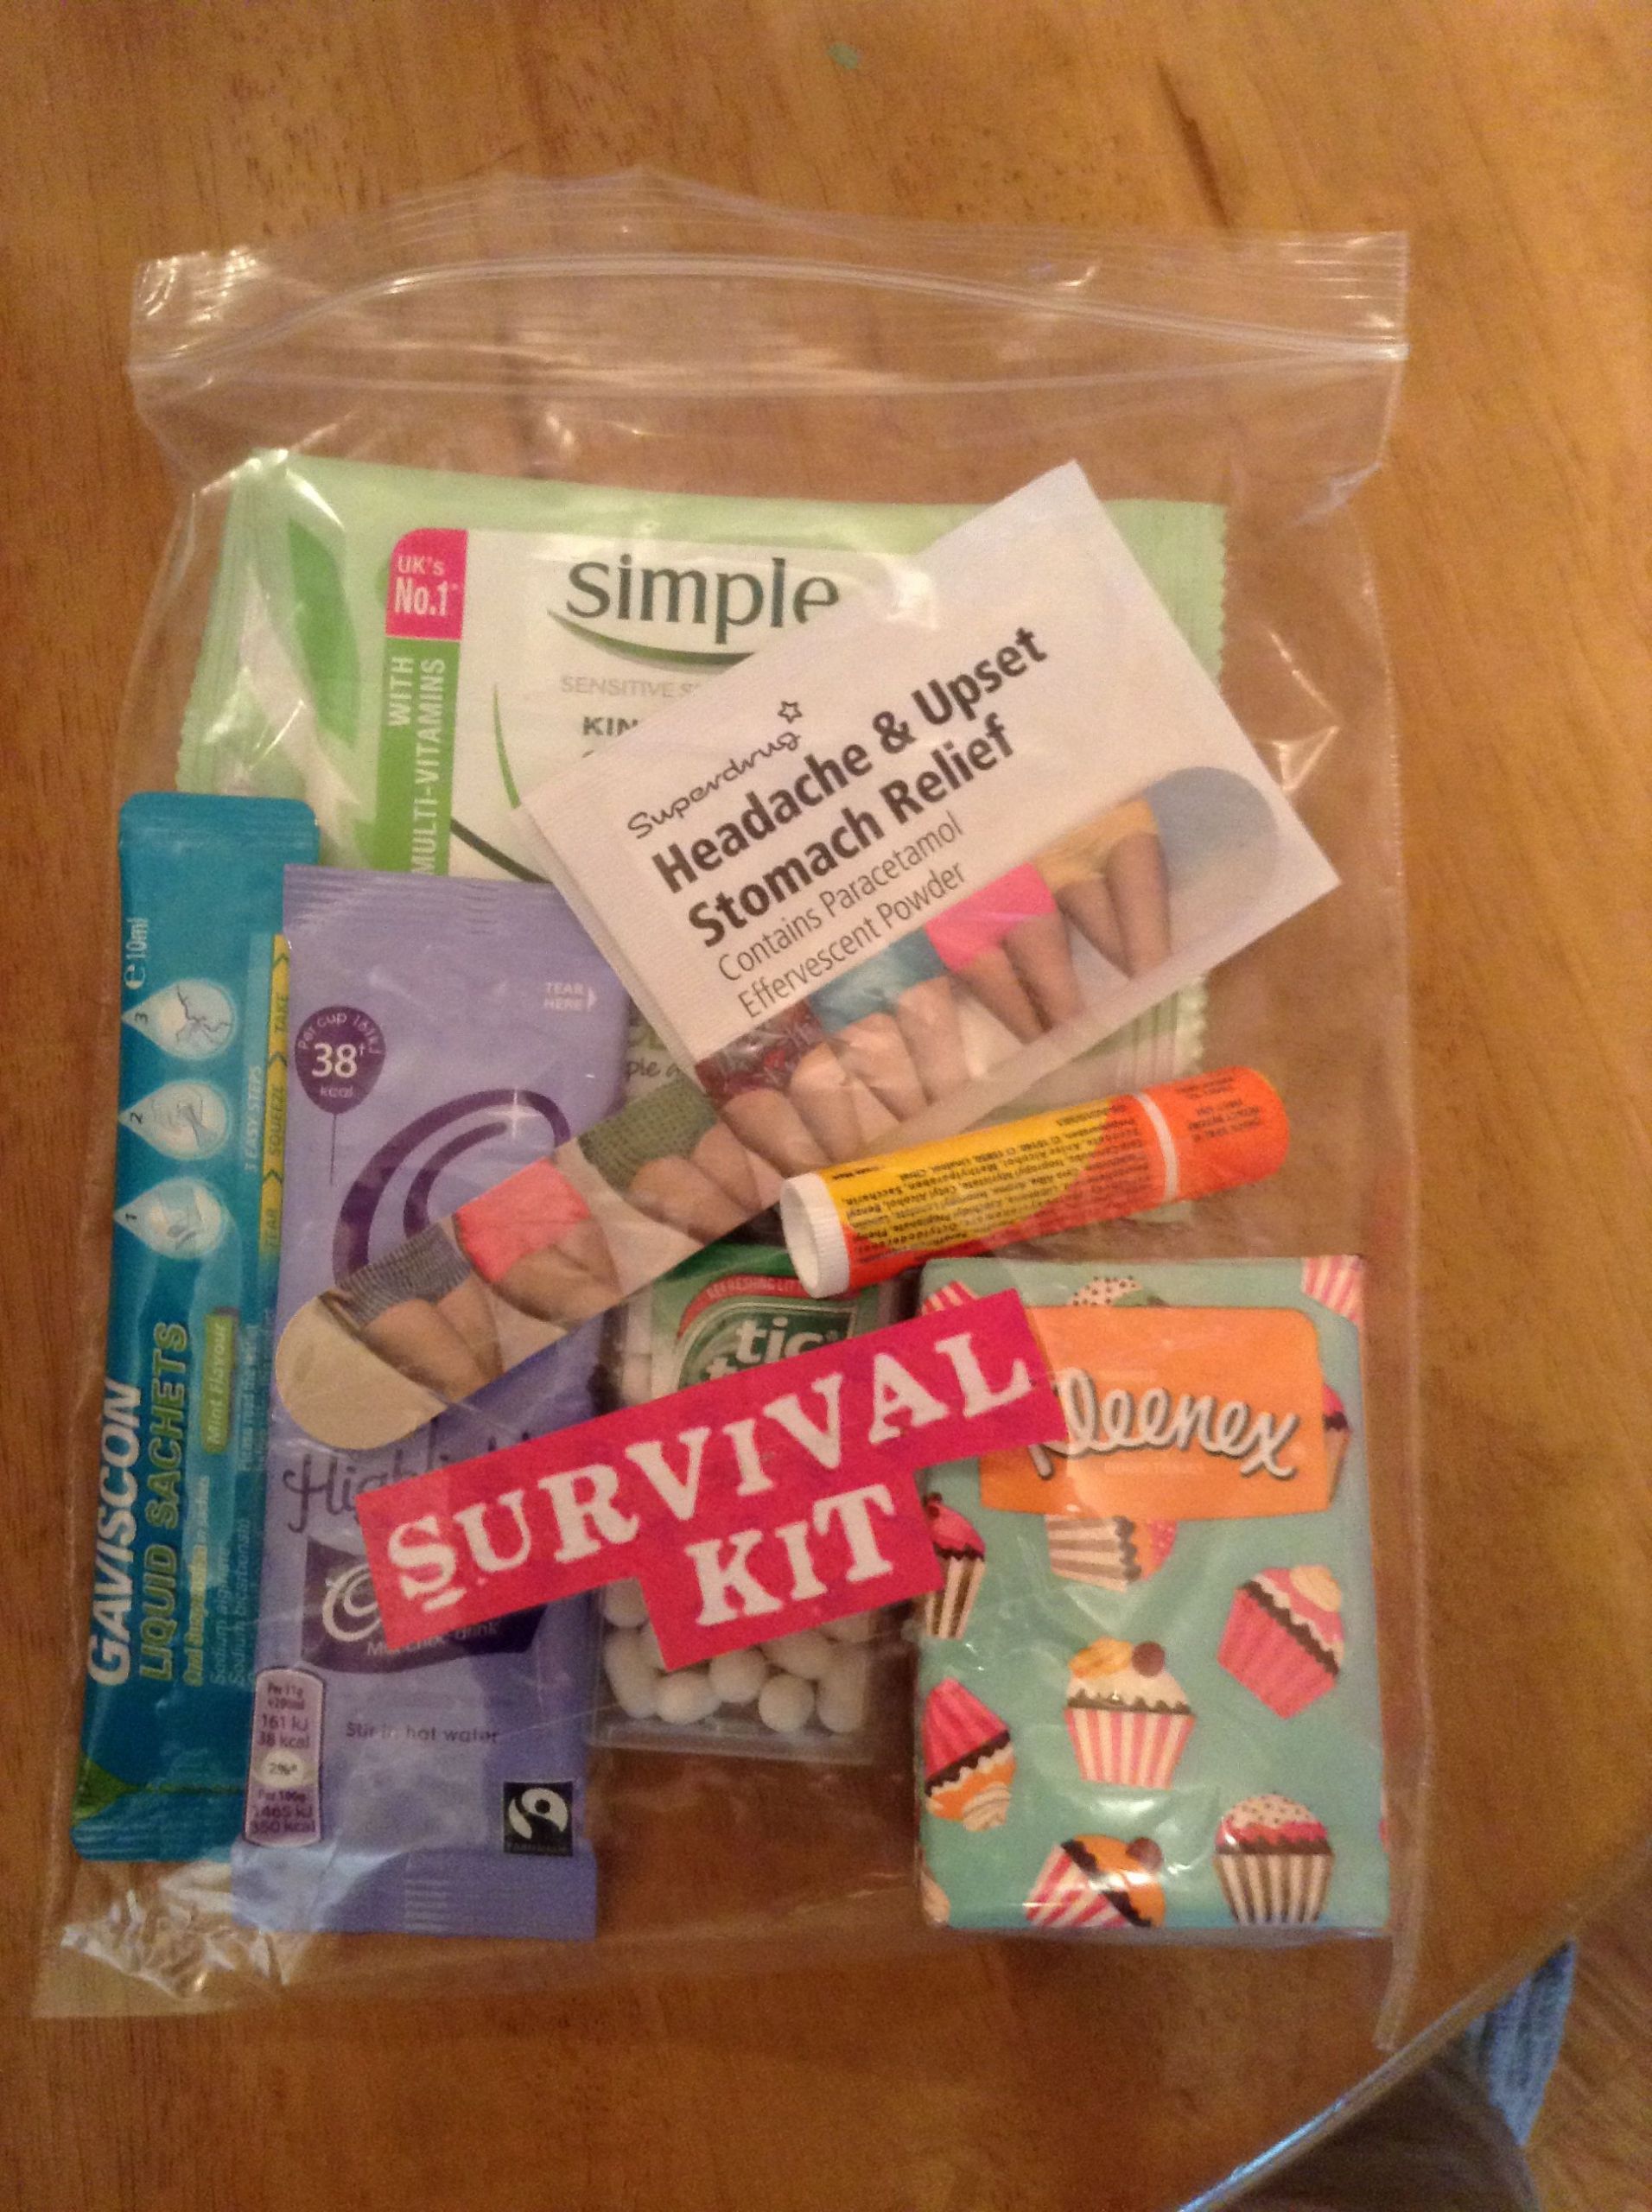 Girls Weekend Gift Bag Ideas
 Survival kit for the weekend